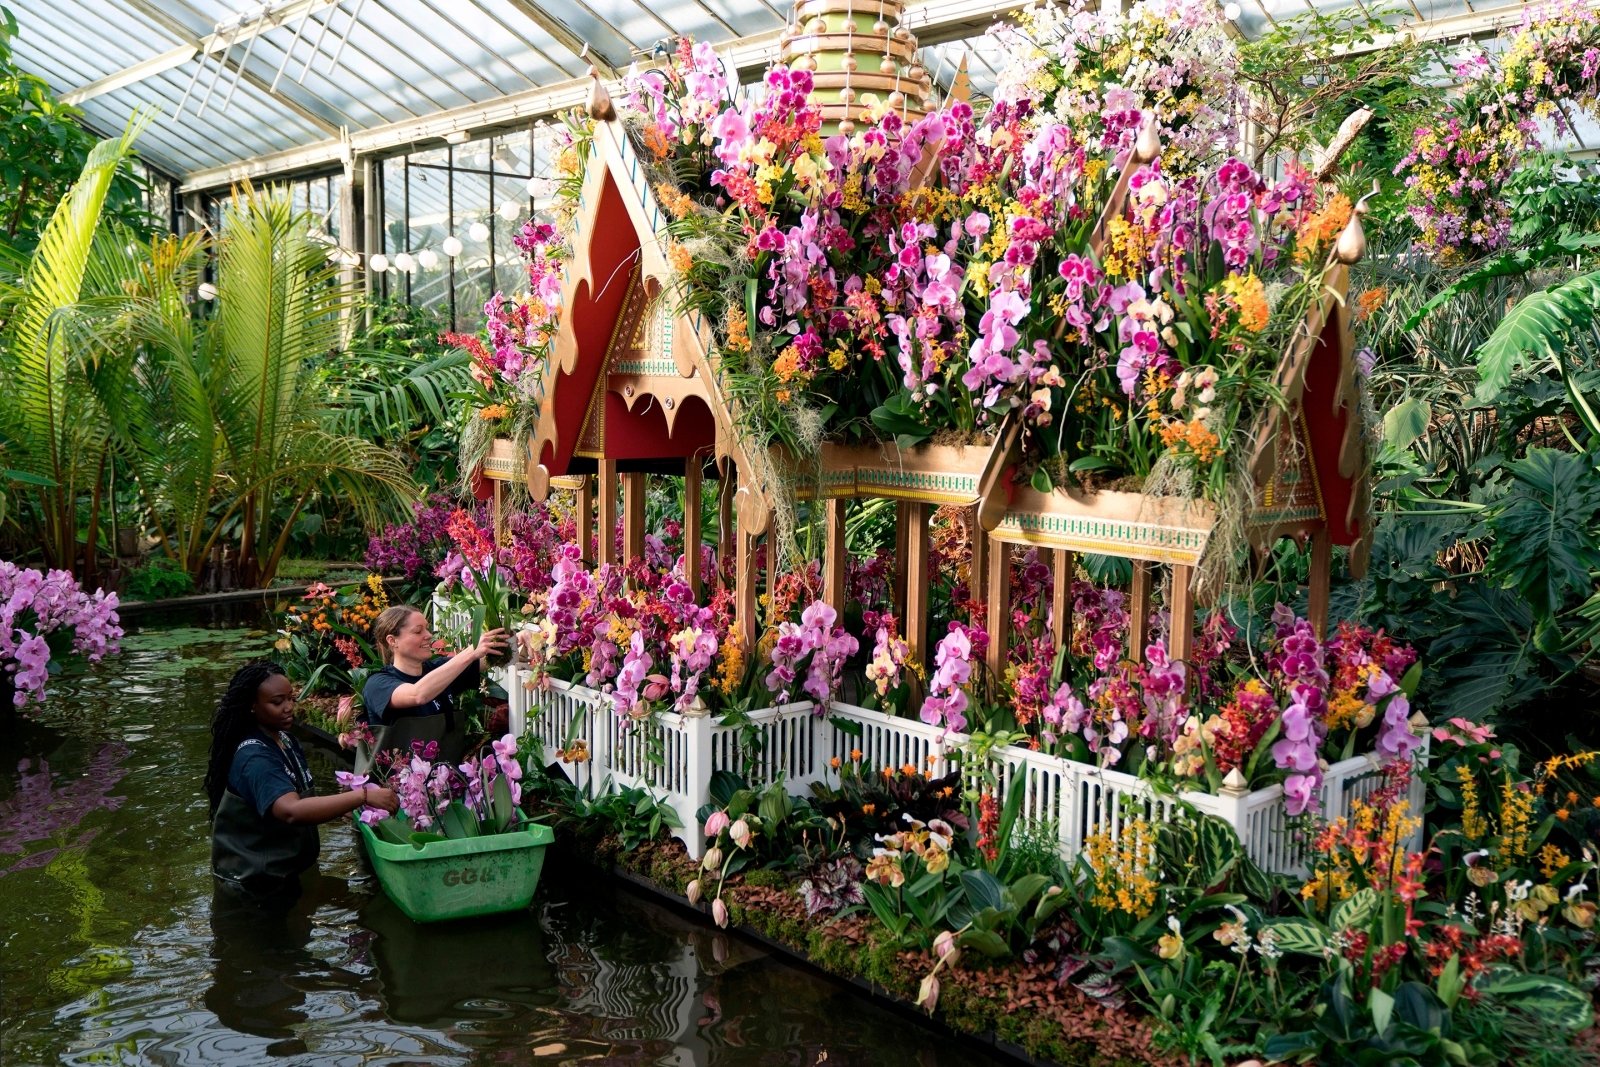 Experience thousands of orchids at Kew Gardens' Thai tropical paradise